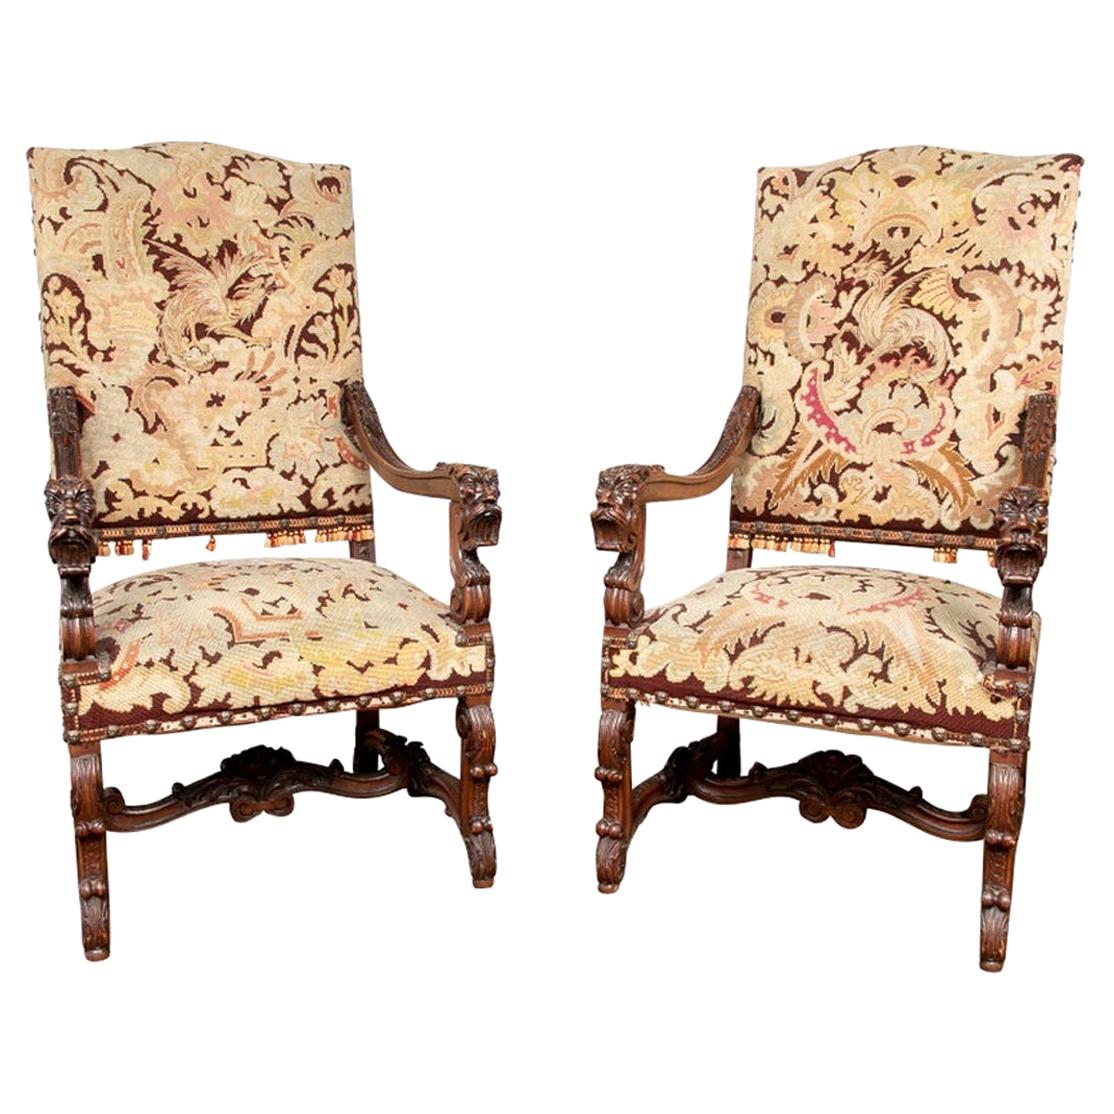 Pair of Carved Antique Hall Chairs with Tapestry Upholstery